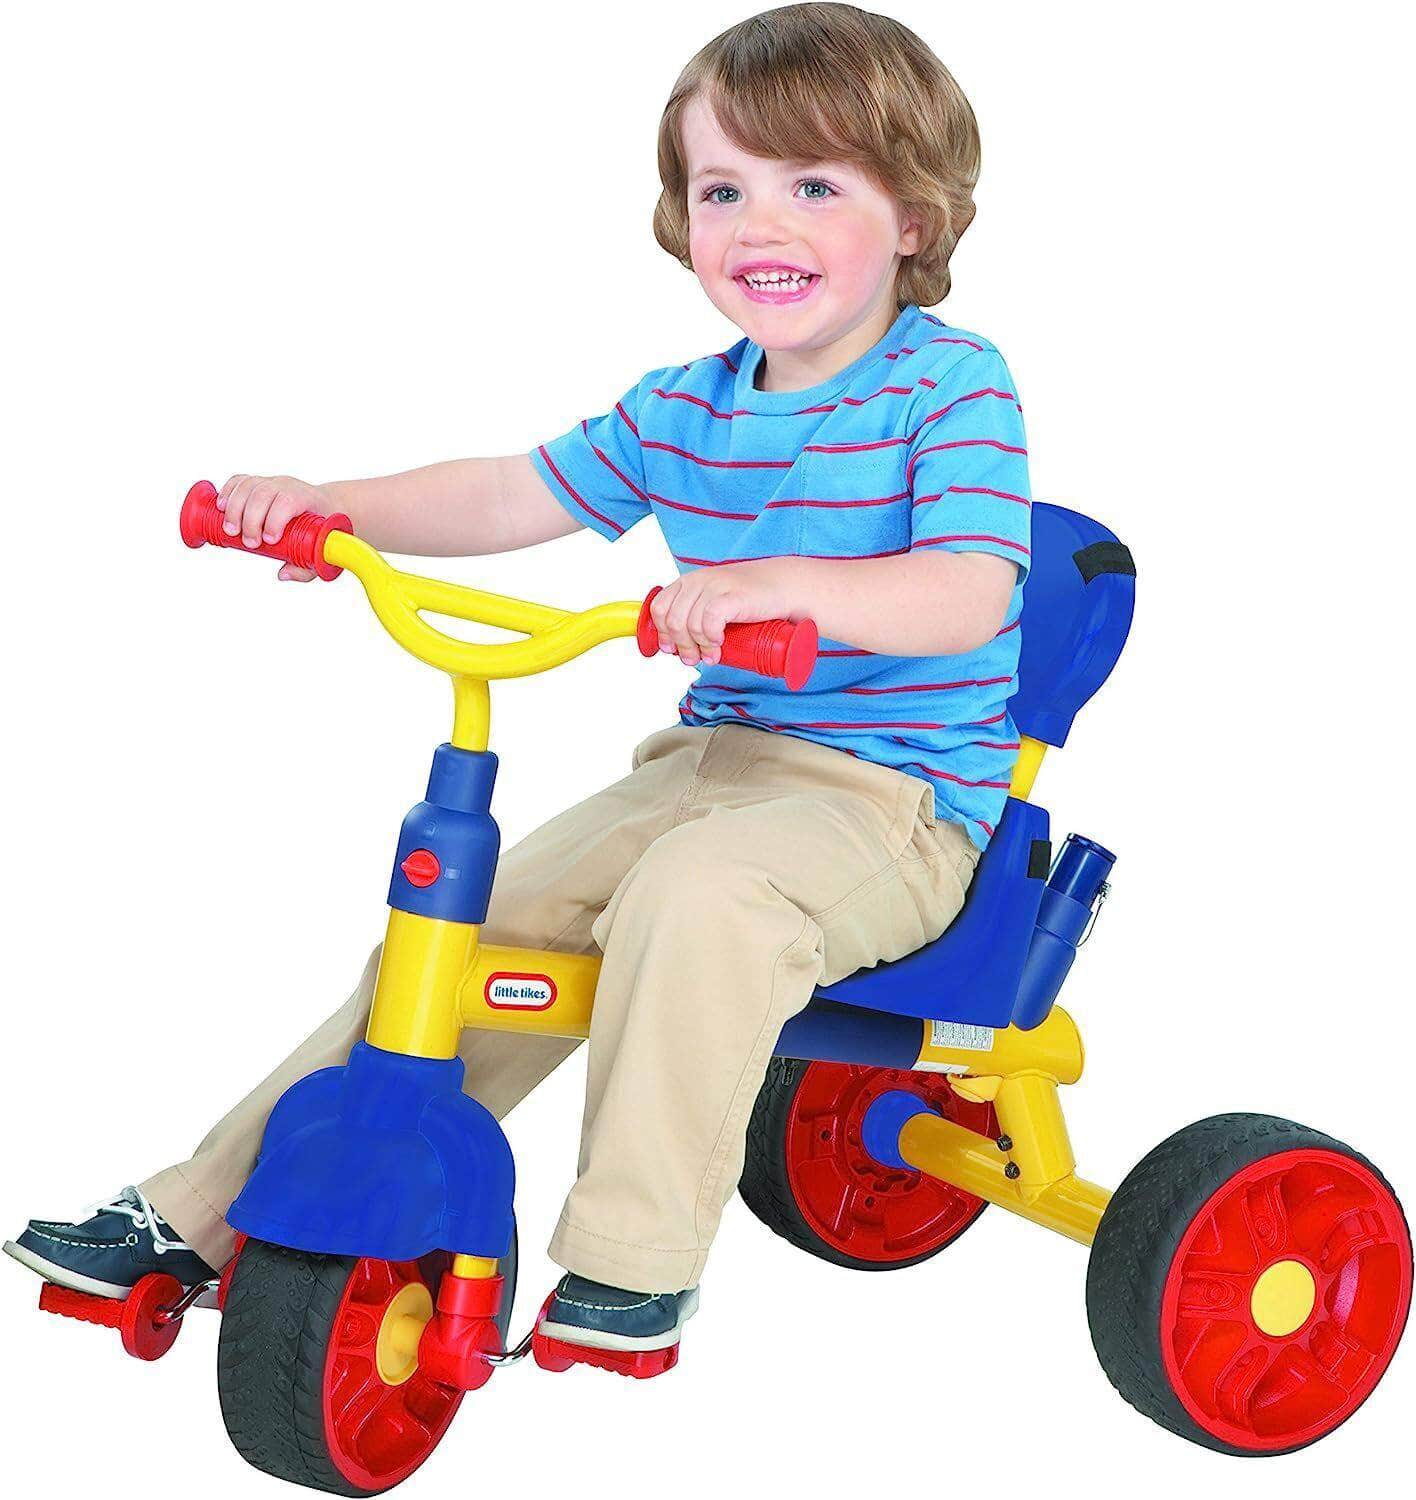 Little Tikes 3-in-1 Trike: Fun and Learning on Wheels